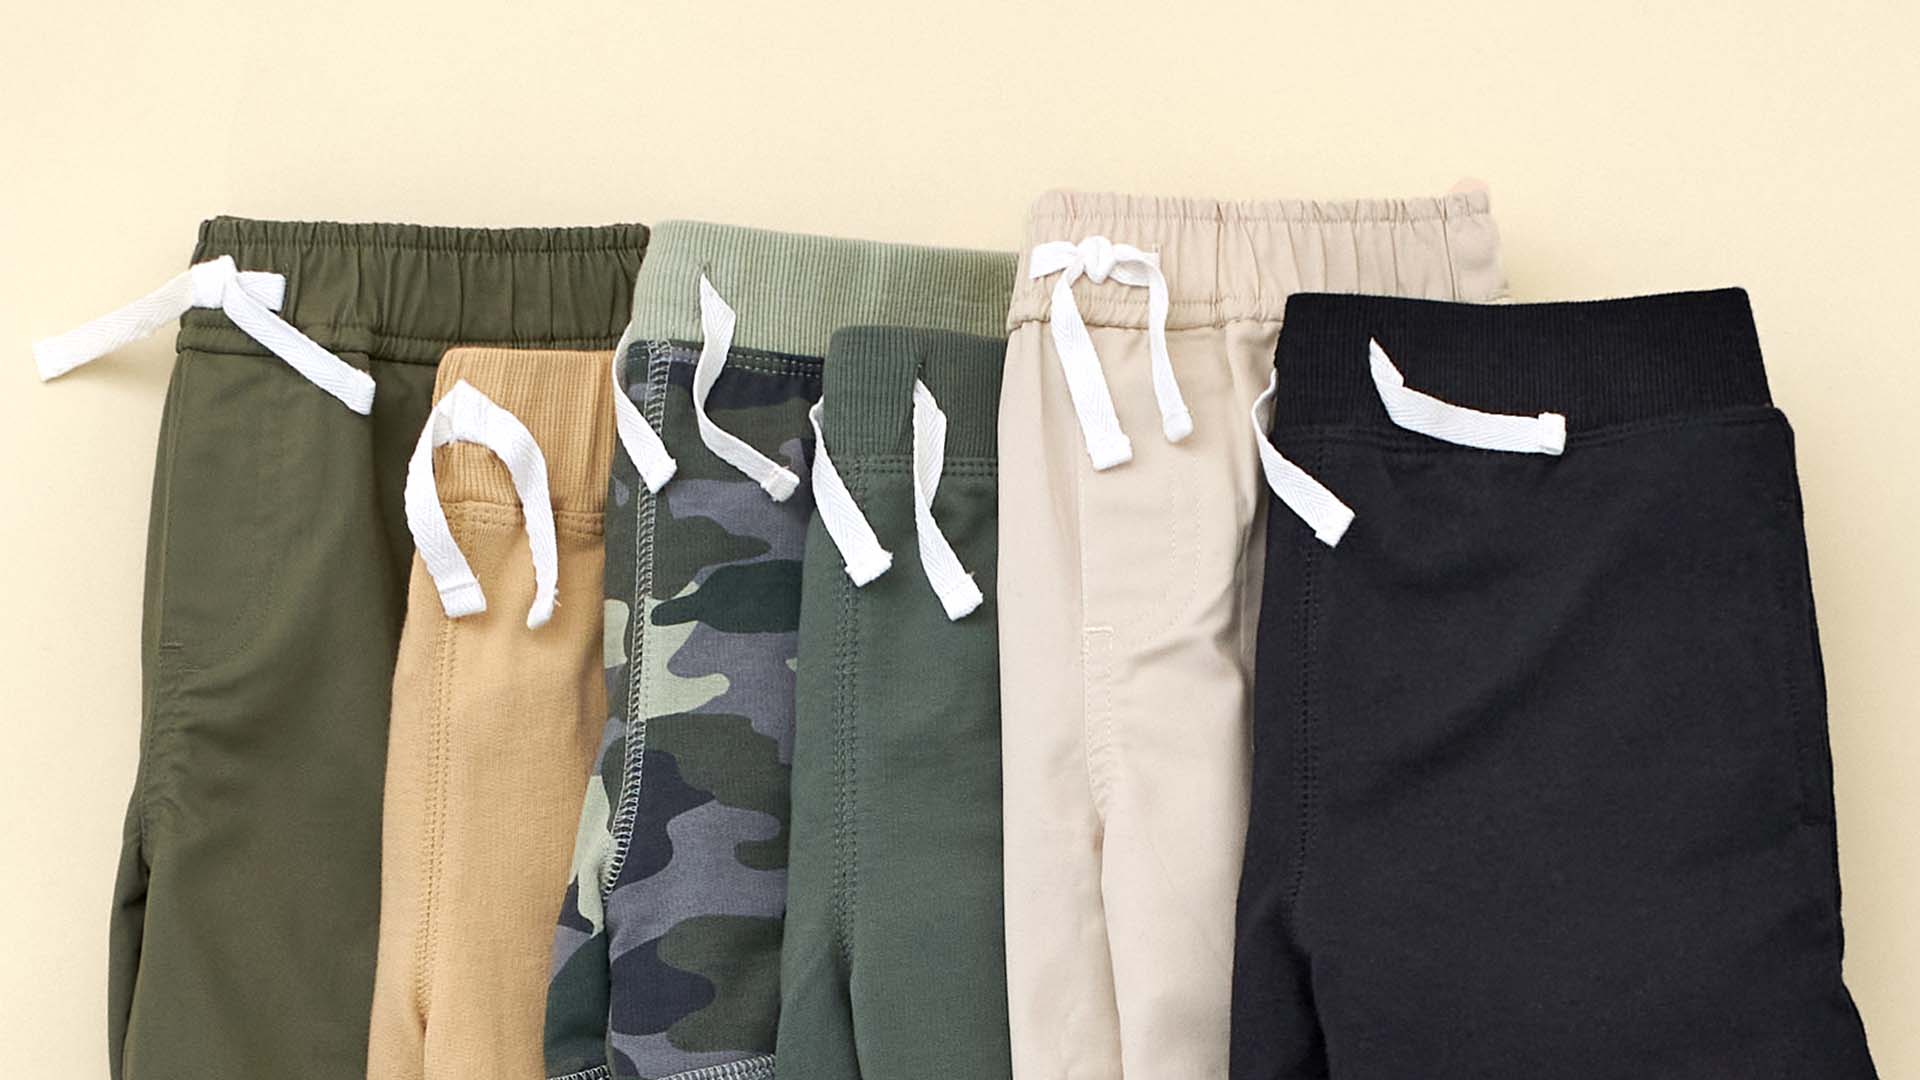 A collection of toddler boy's joggers in various colors, designed to be comfy and cozy.